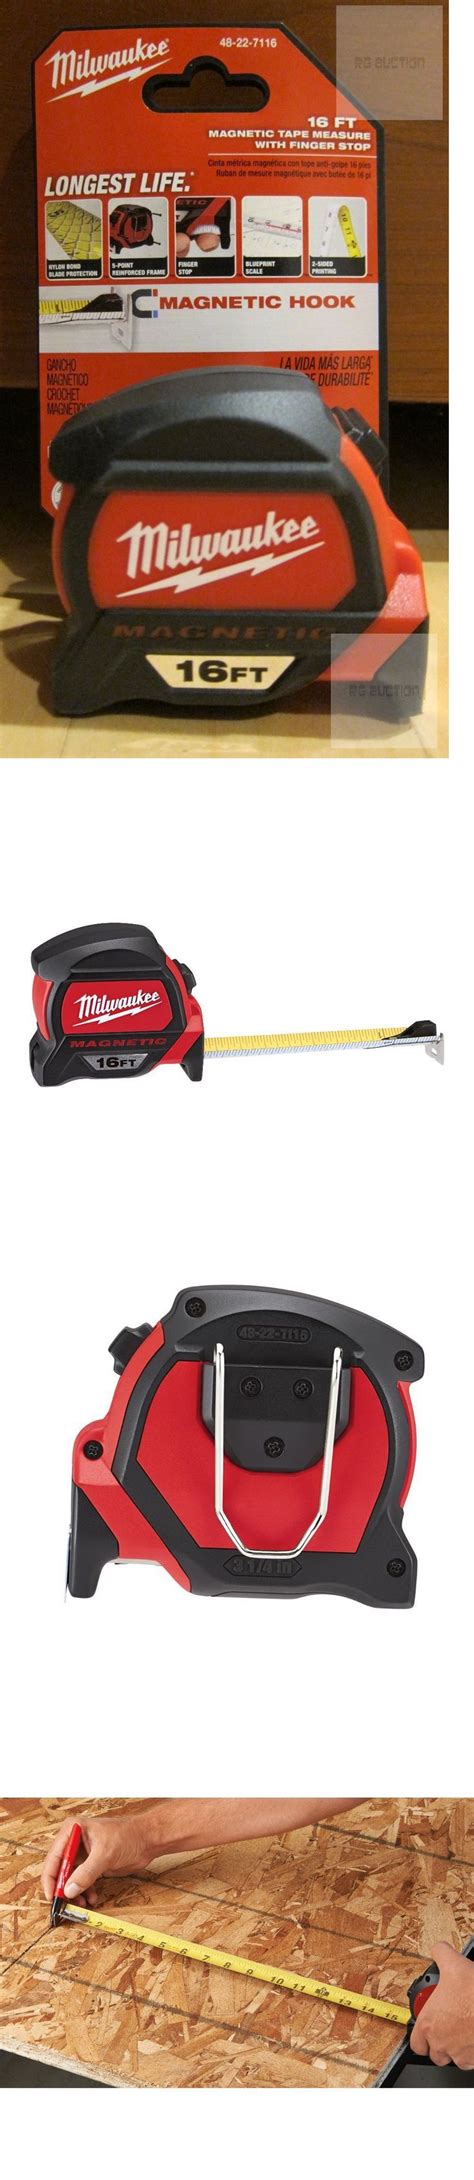 Measuring Tapes And Rulers Milwaukee Ft Premium Magnetic Tape Measure BUY IT NOW